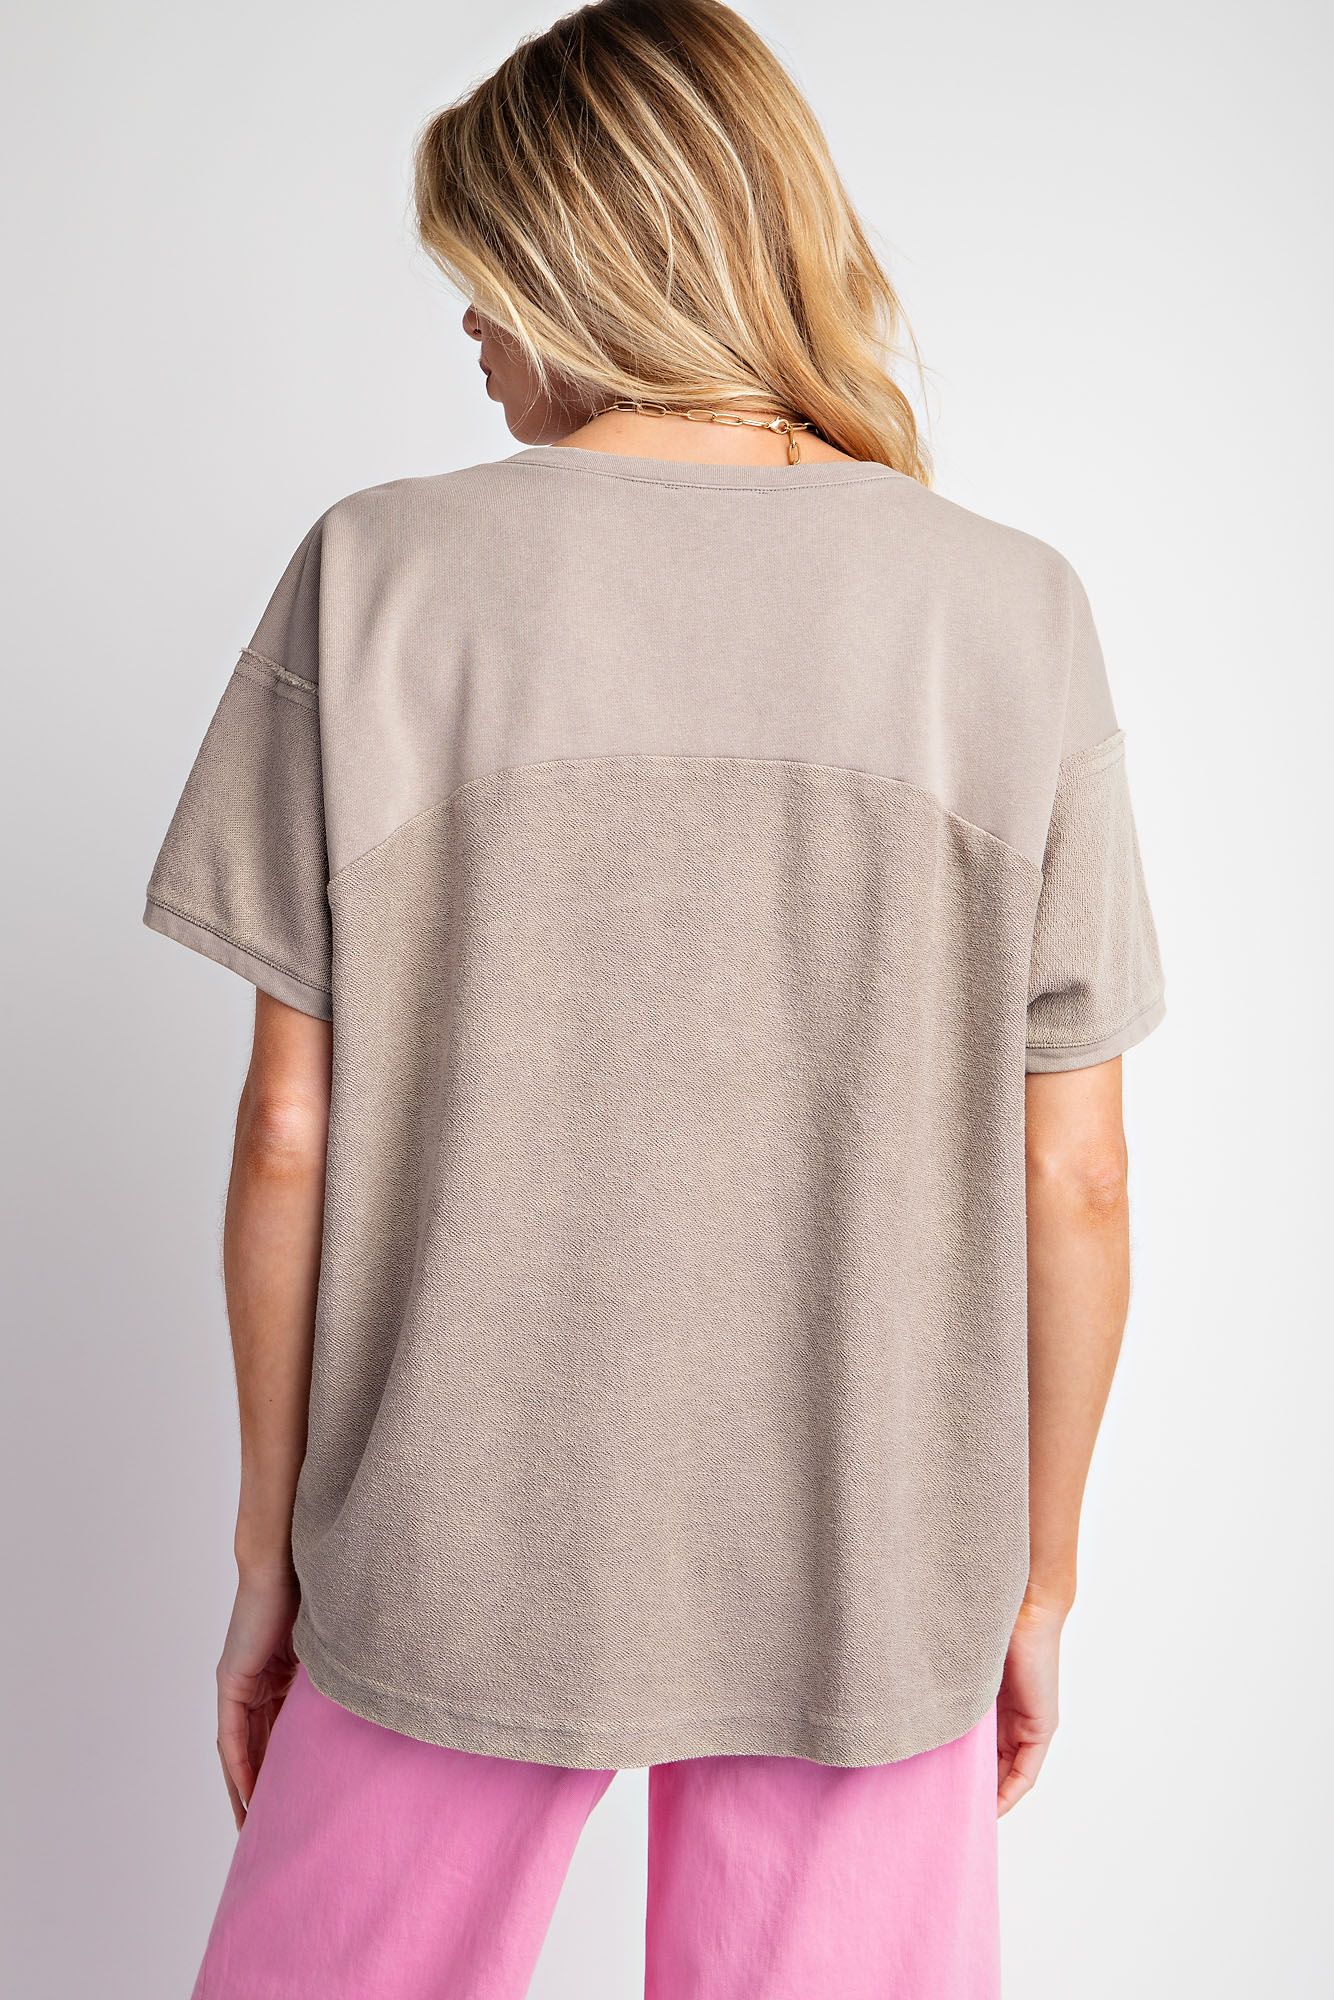 Mineral Washed Terry Knit Top